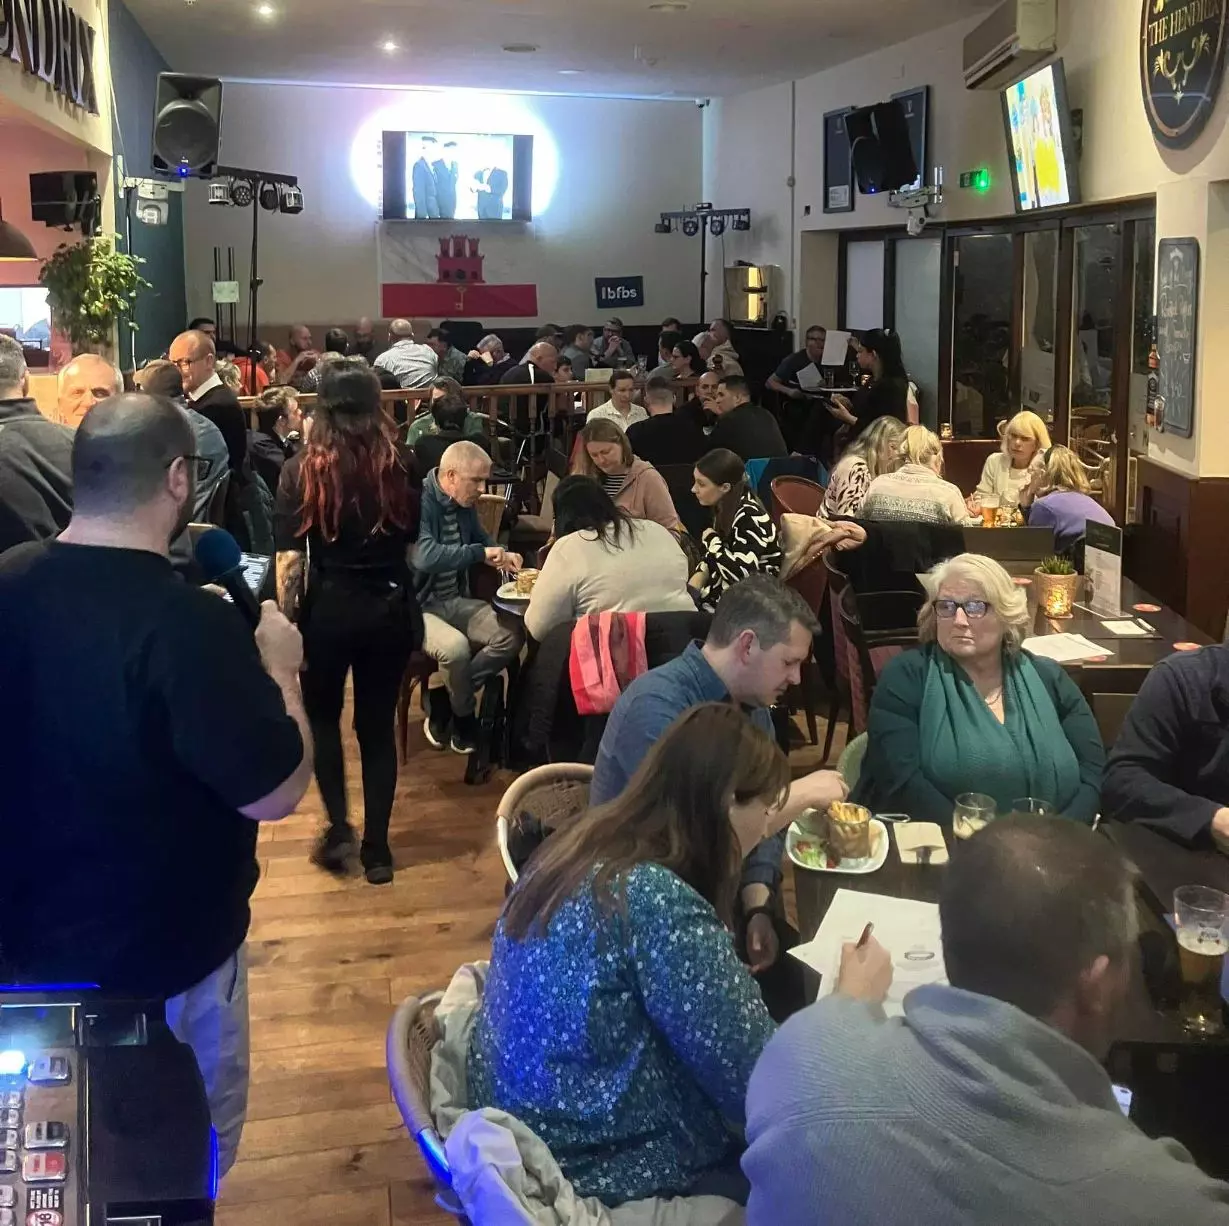 A wide angle shot capturing inside of The Hendrix with a full house on our weekly Charity Quiz Night